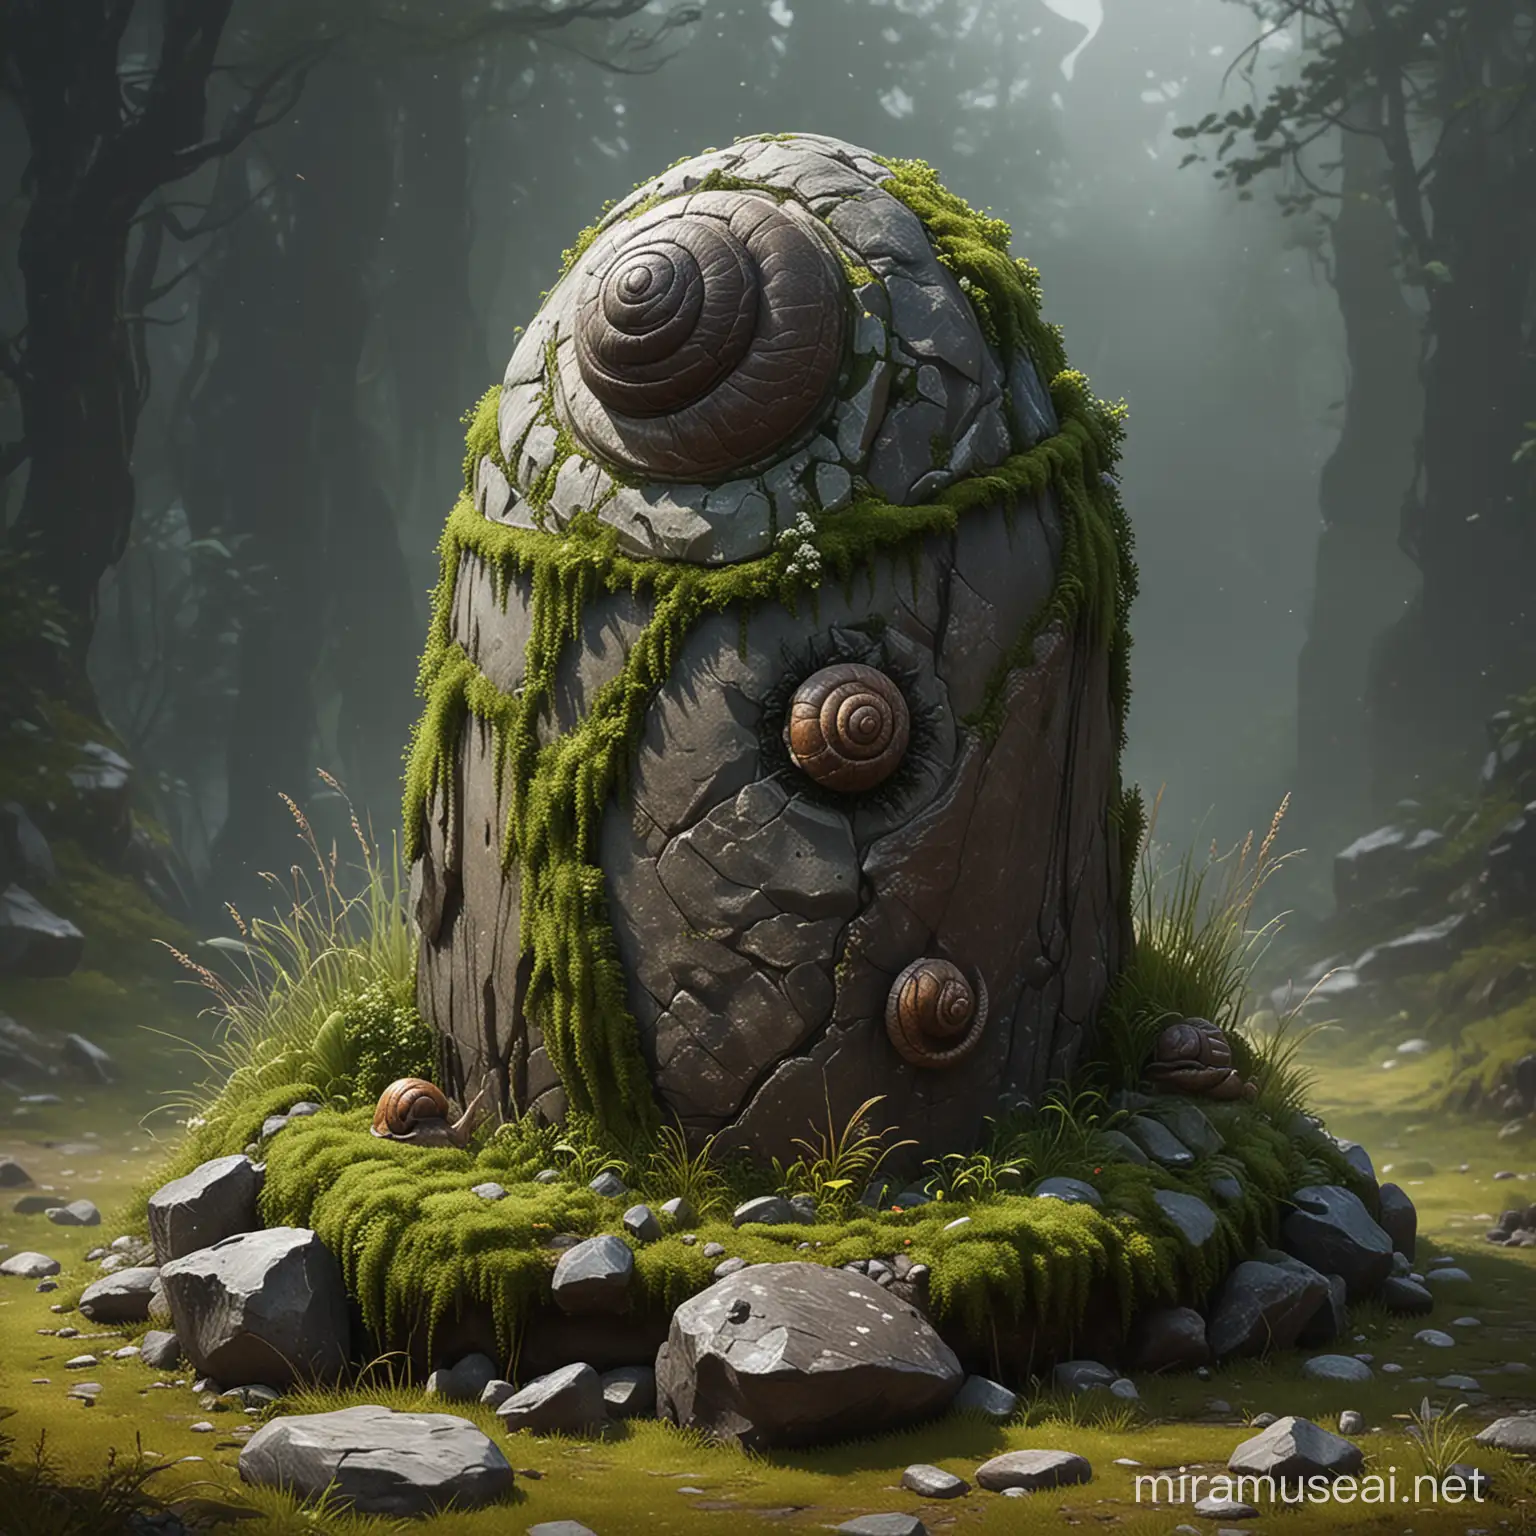 Mossy Stone Guardian Digital Painting of an Aggressive Sapient Snaillike Creature